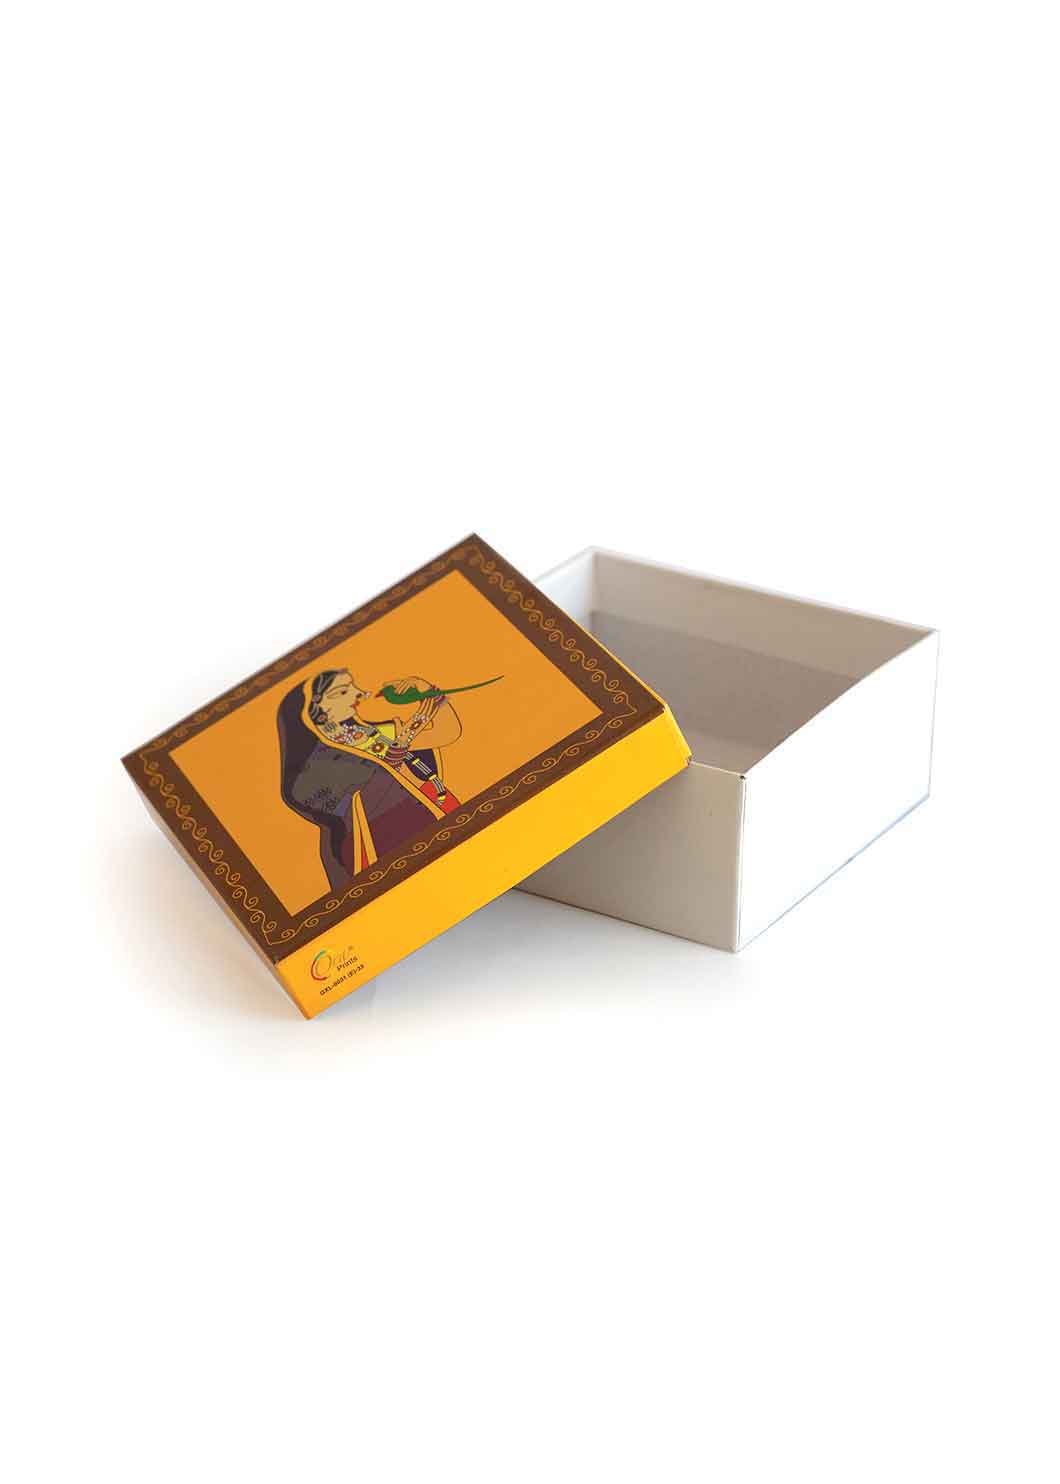 Mughal Queen Design Box for Packing